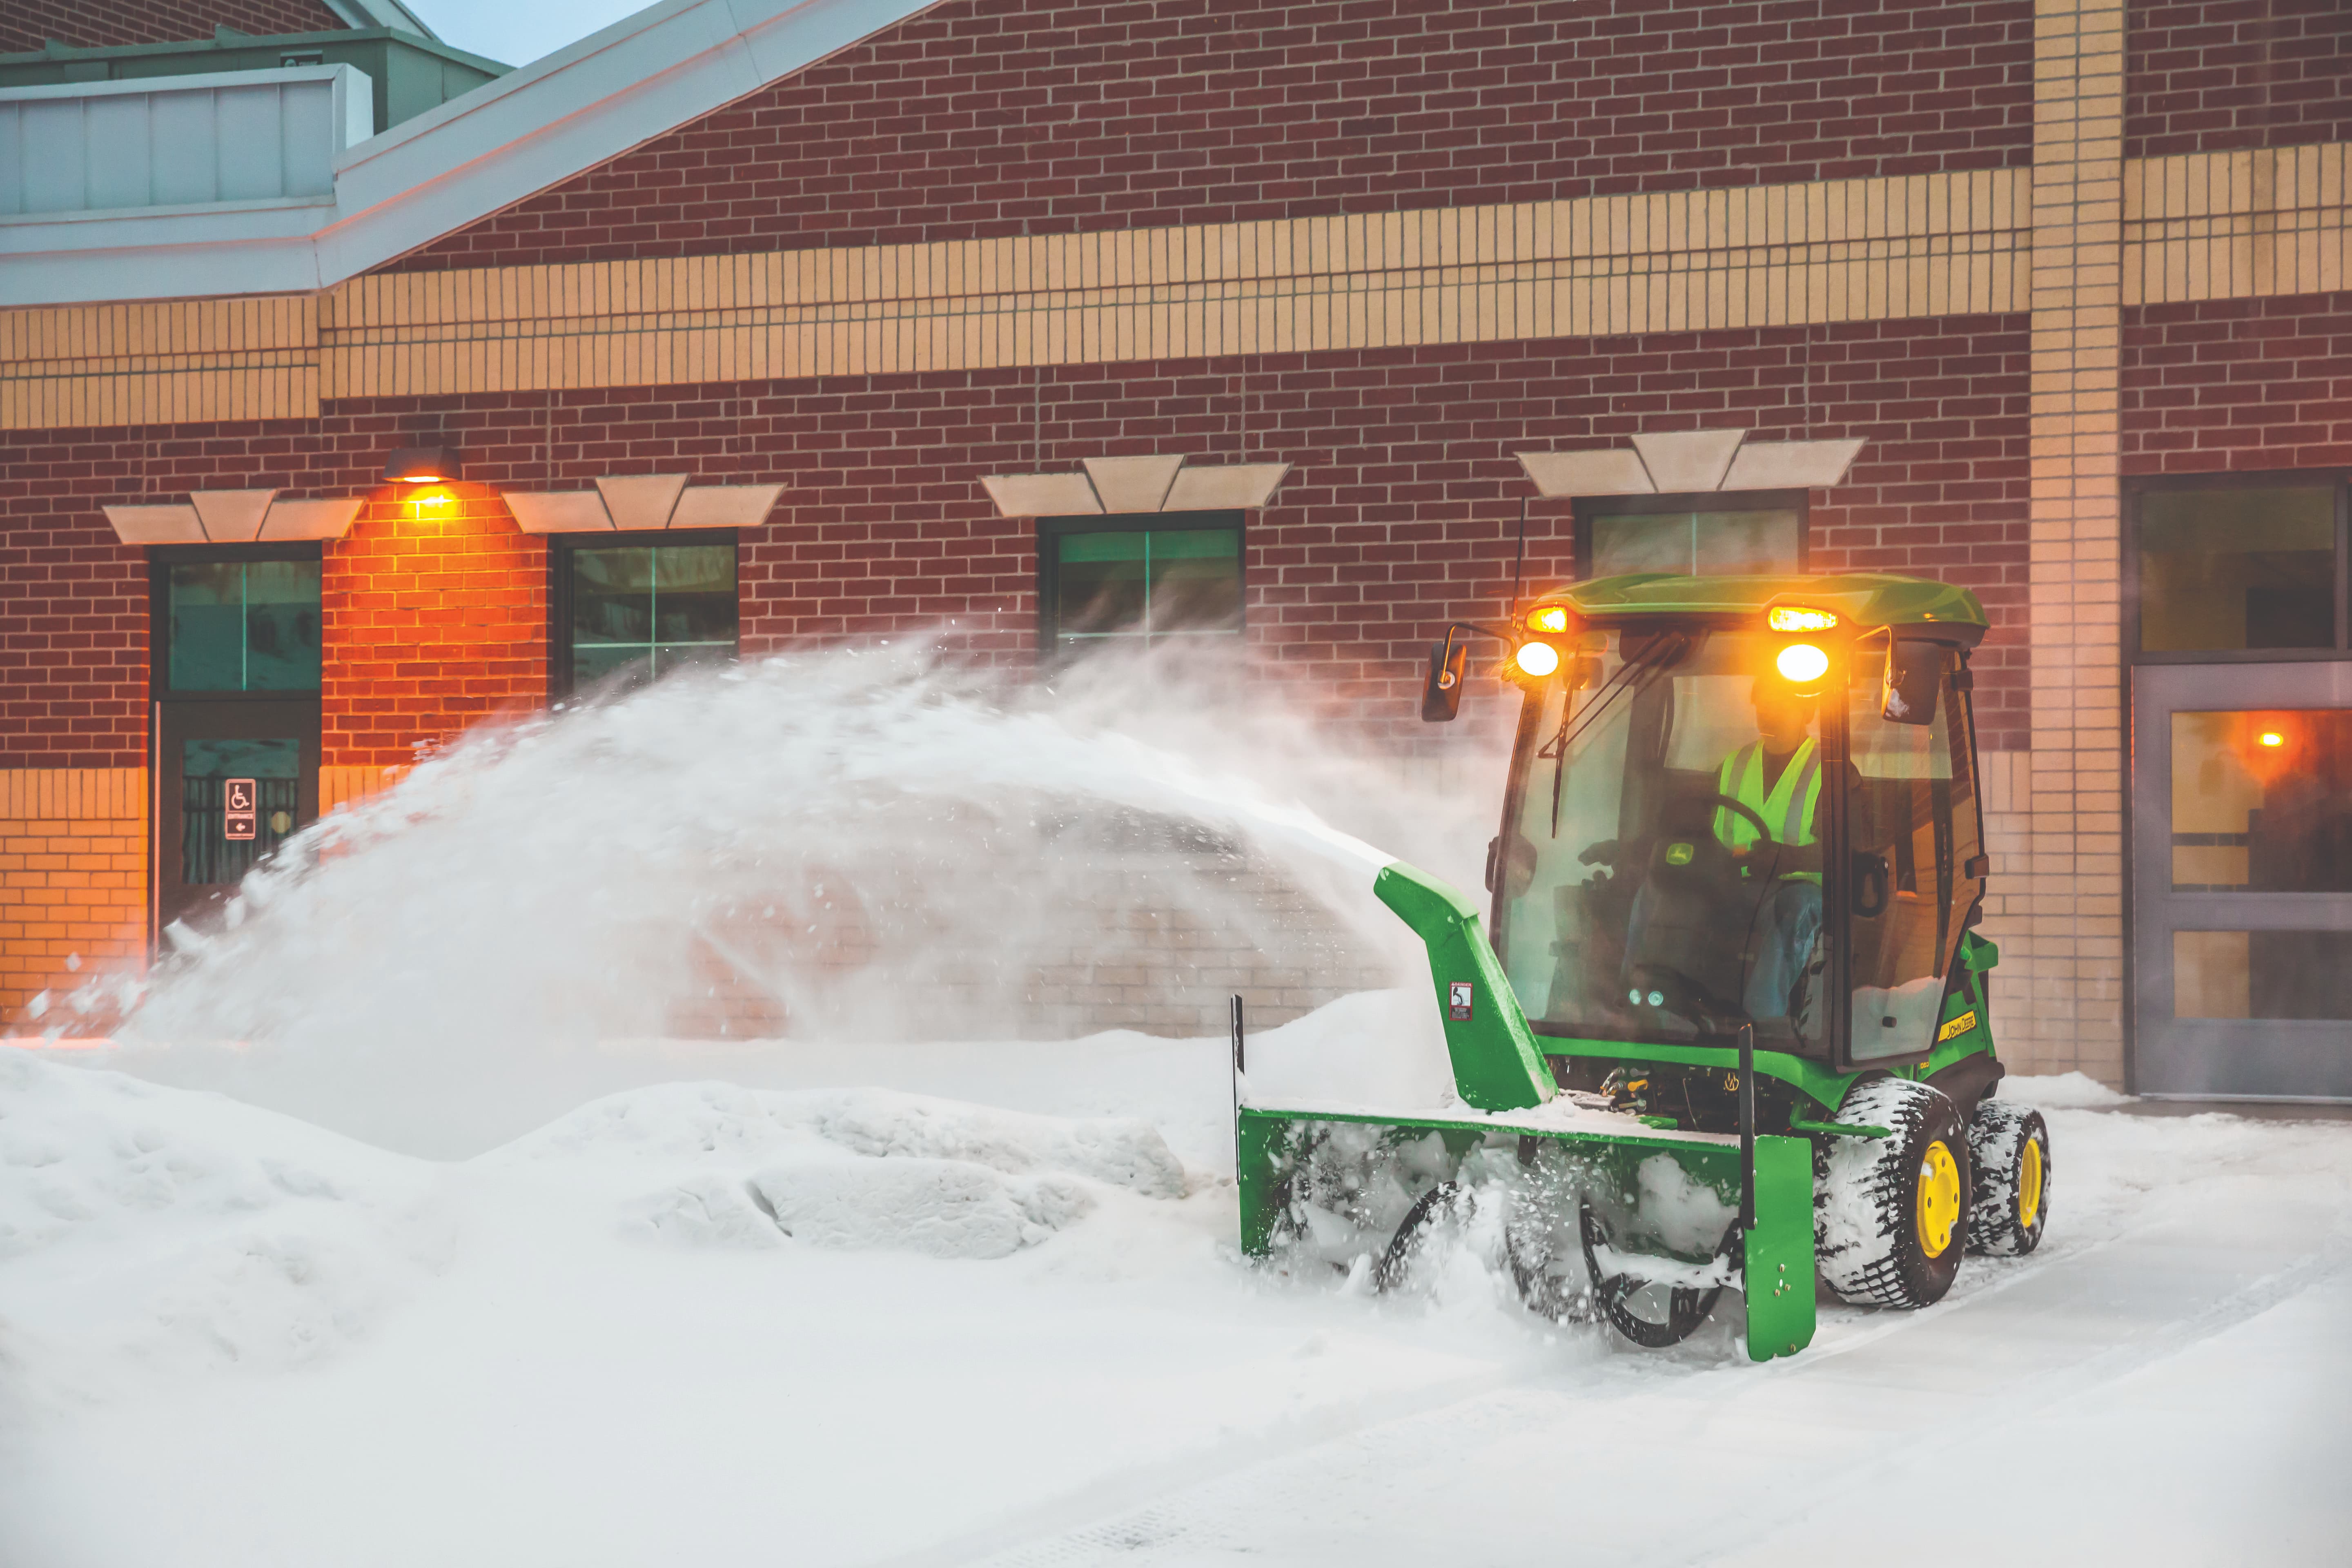 Essential Snow Removal Equipment: The Snow Blower